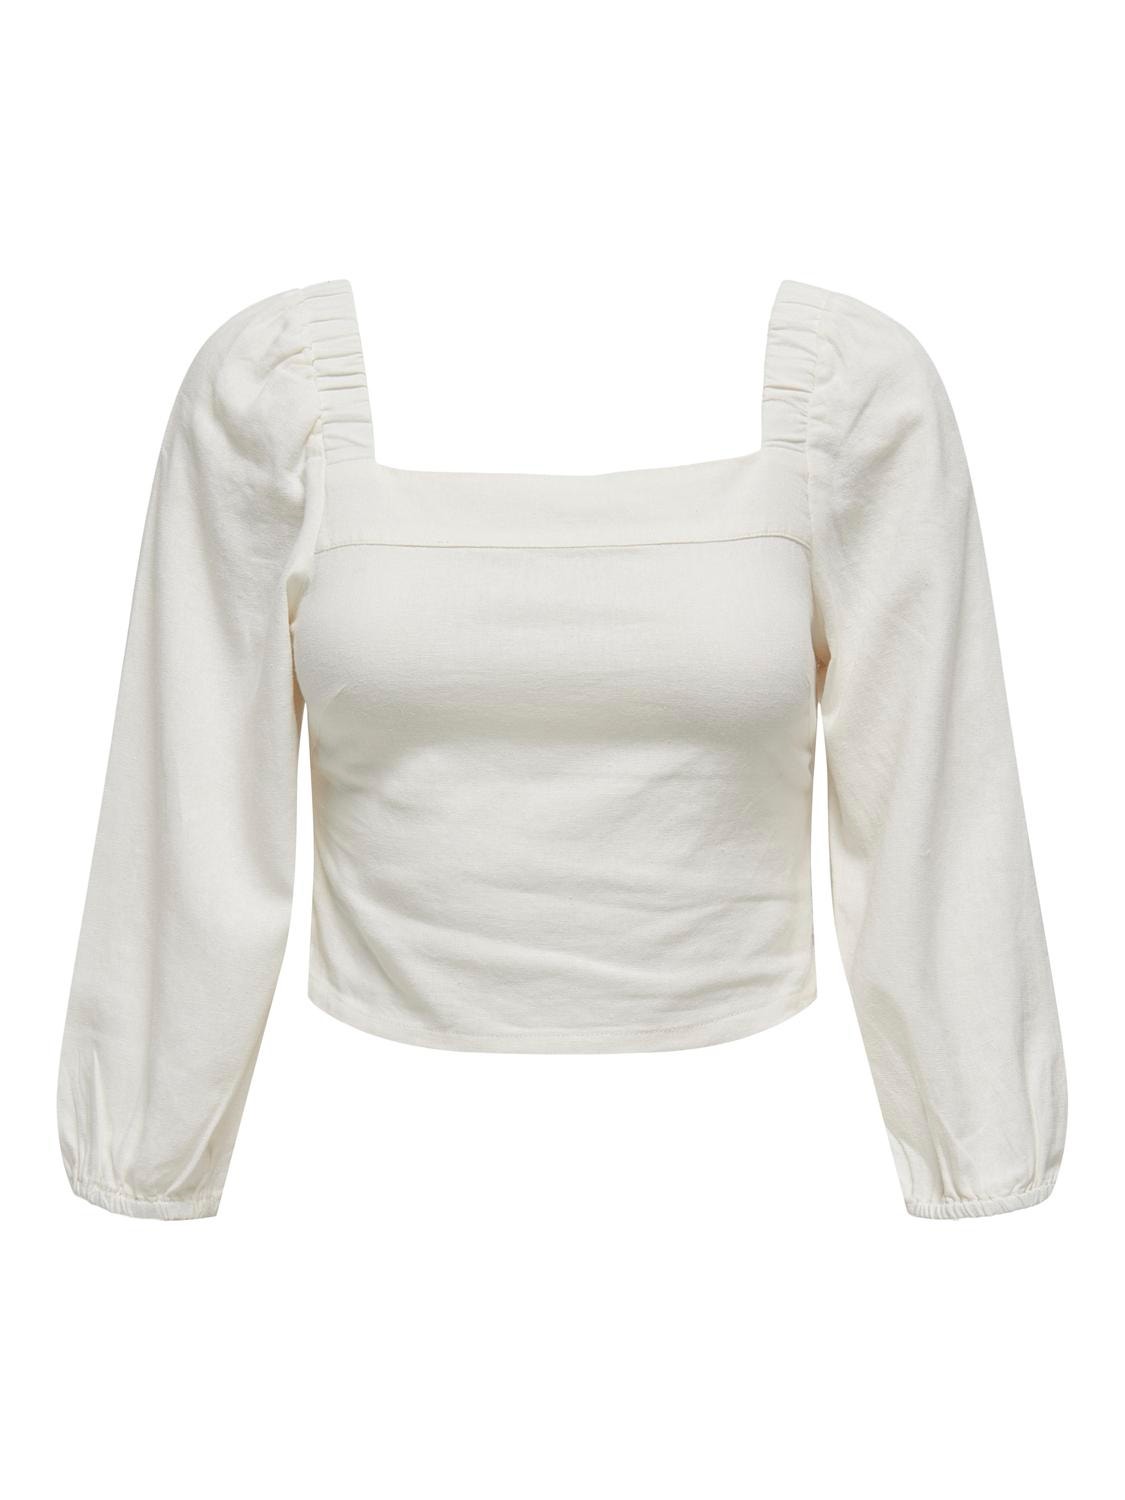 ONLY Puff sleeved top -Cloud Dancer - 15311374